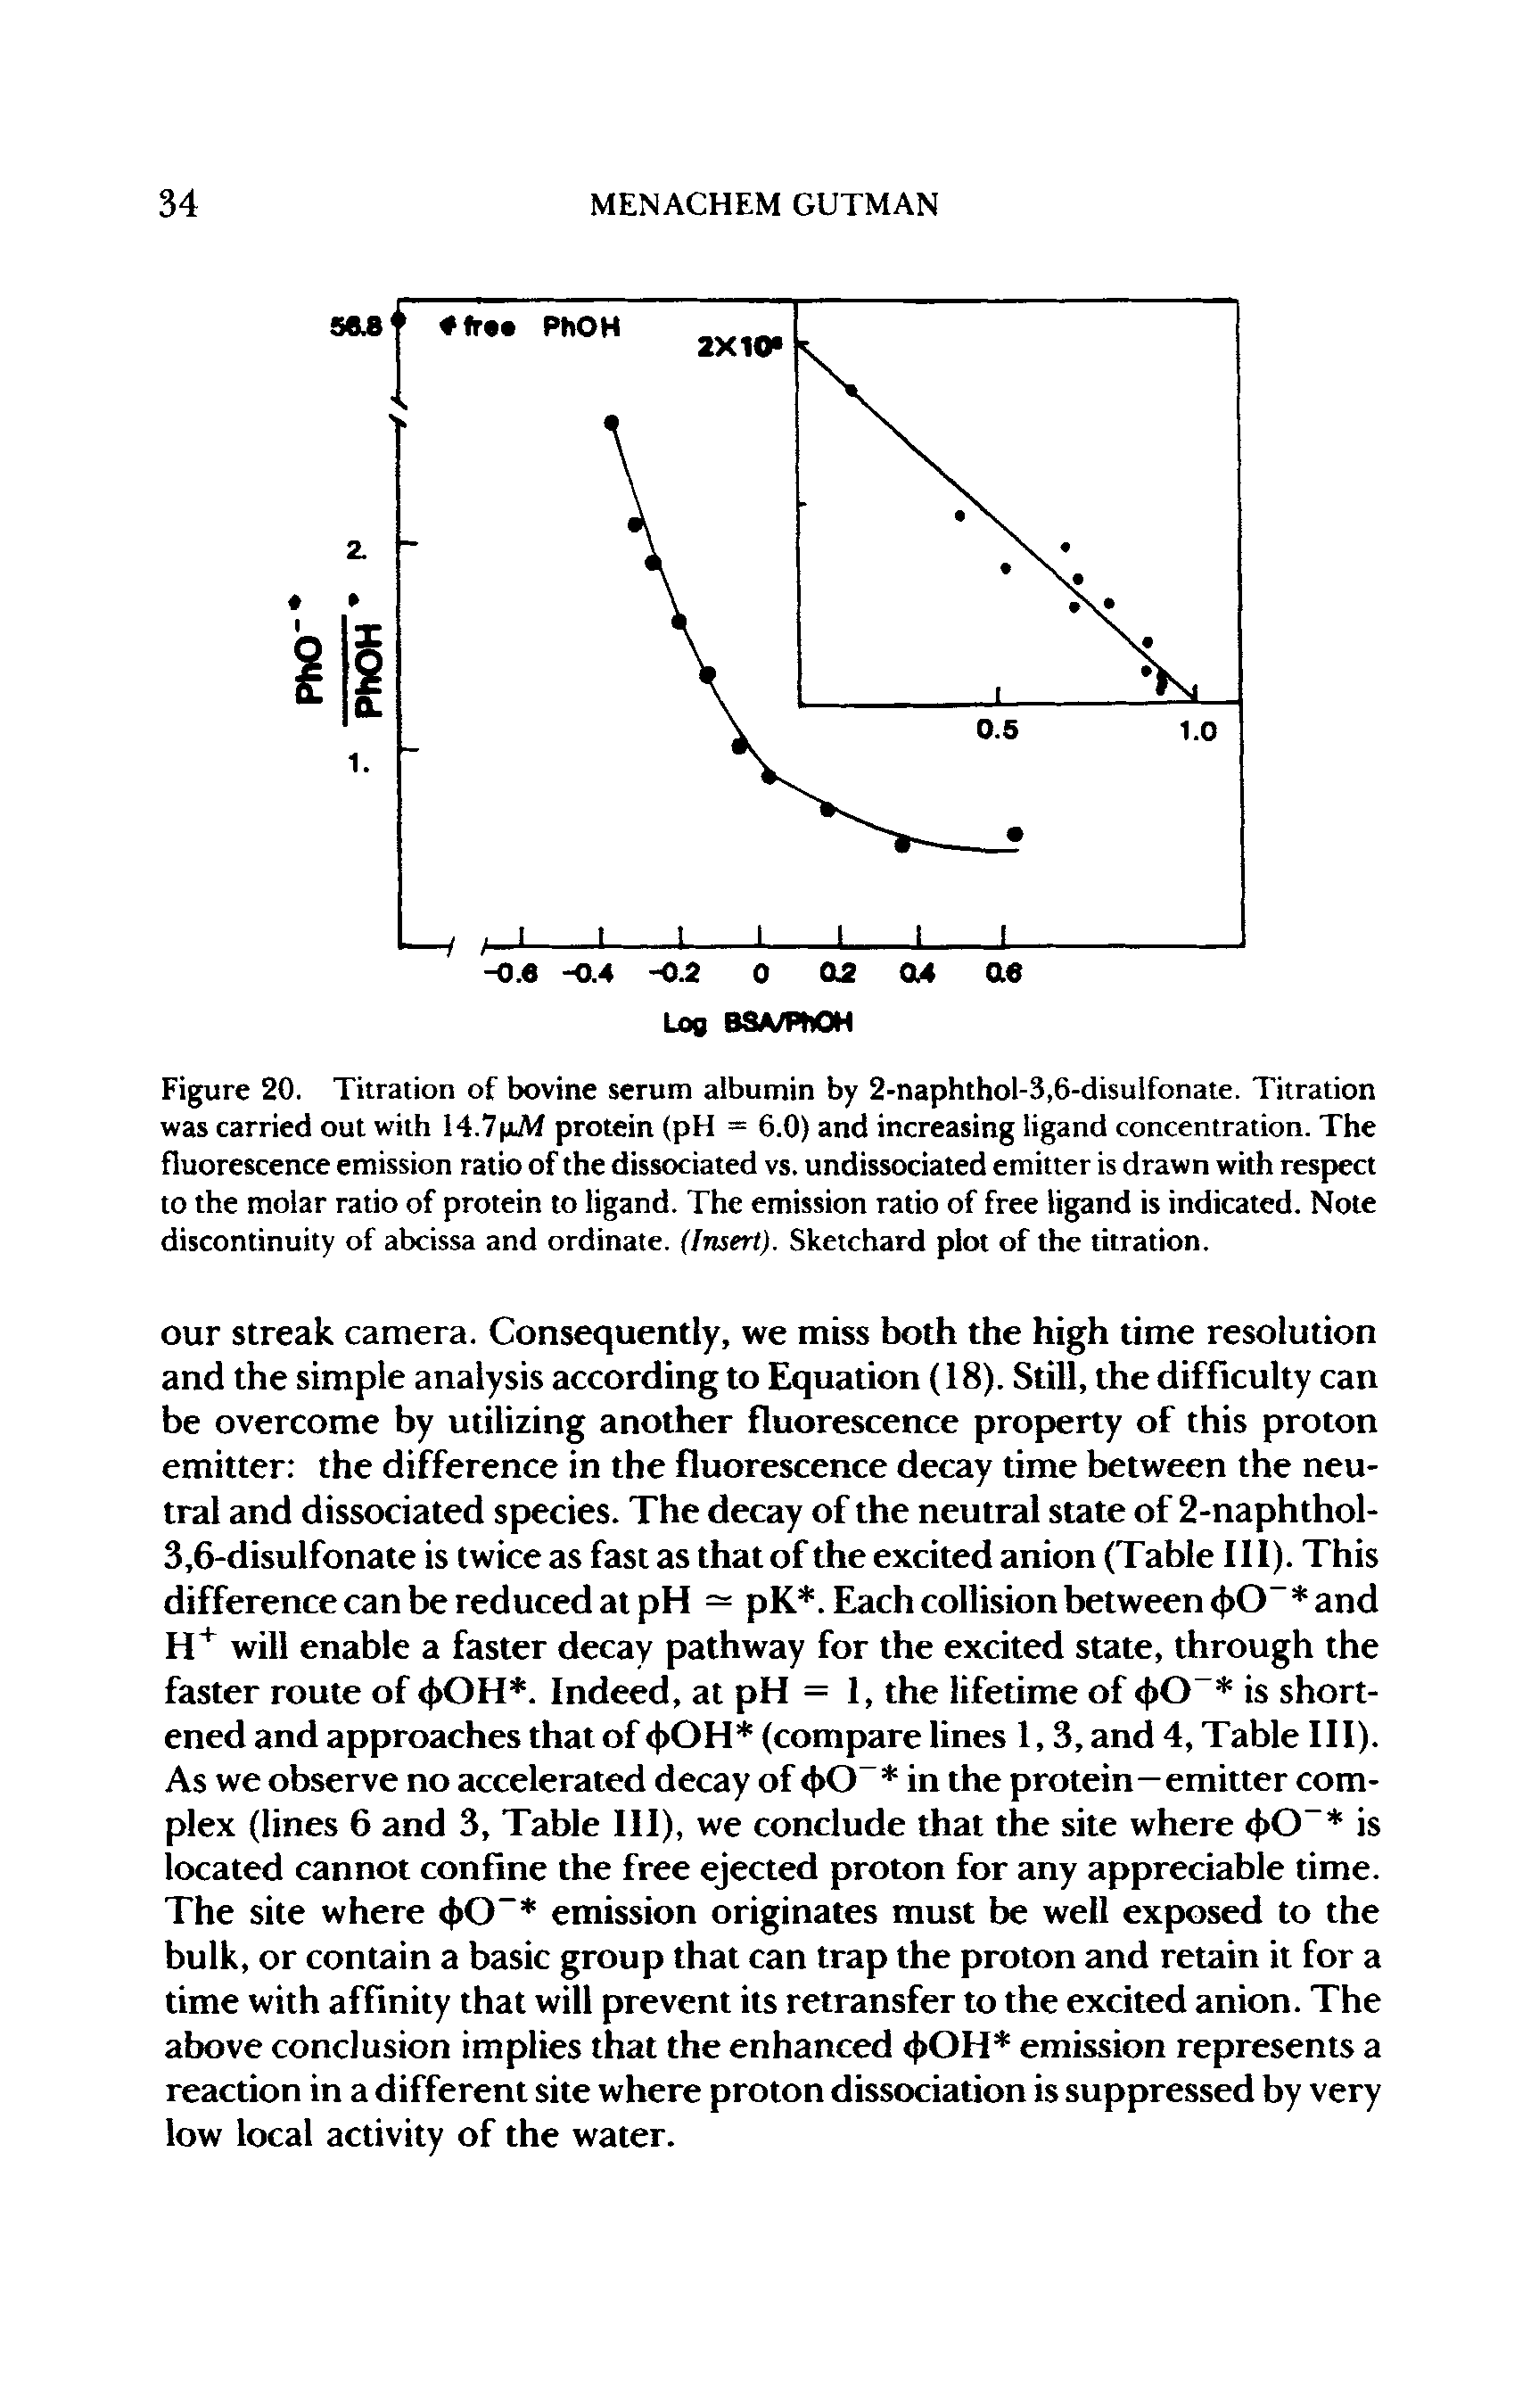 Figure 20. Titration of bovine serum albumin by 2-naphthol-3,6-disulfonate. Titration was carried out with 14.7 xiW protein (pH = 6.0) and increasing ligand concentration. The fluorescence emission ratio of the dissociated vs. undissociated emitter is drawn with respect to the molar ratio of protein to ligand. The emission ratio of free ligand is indicated. Note discontinuity of abcissa and ordinate. (Insert). Sketchard plot of the titration.